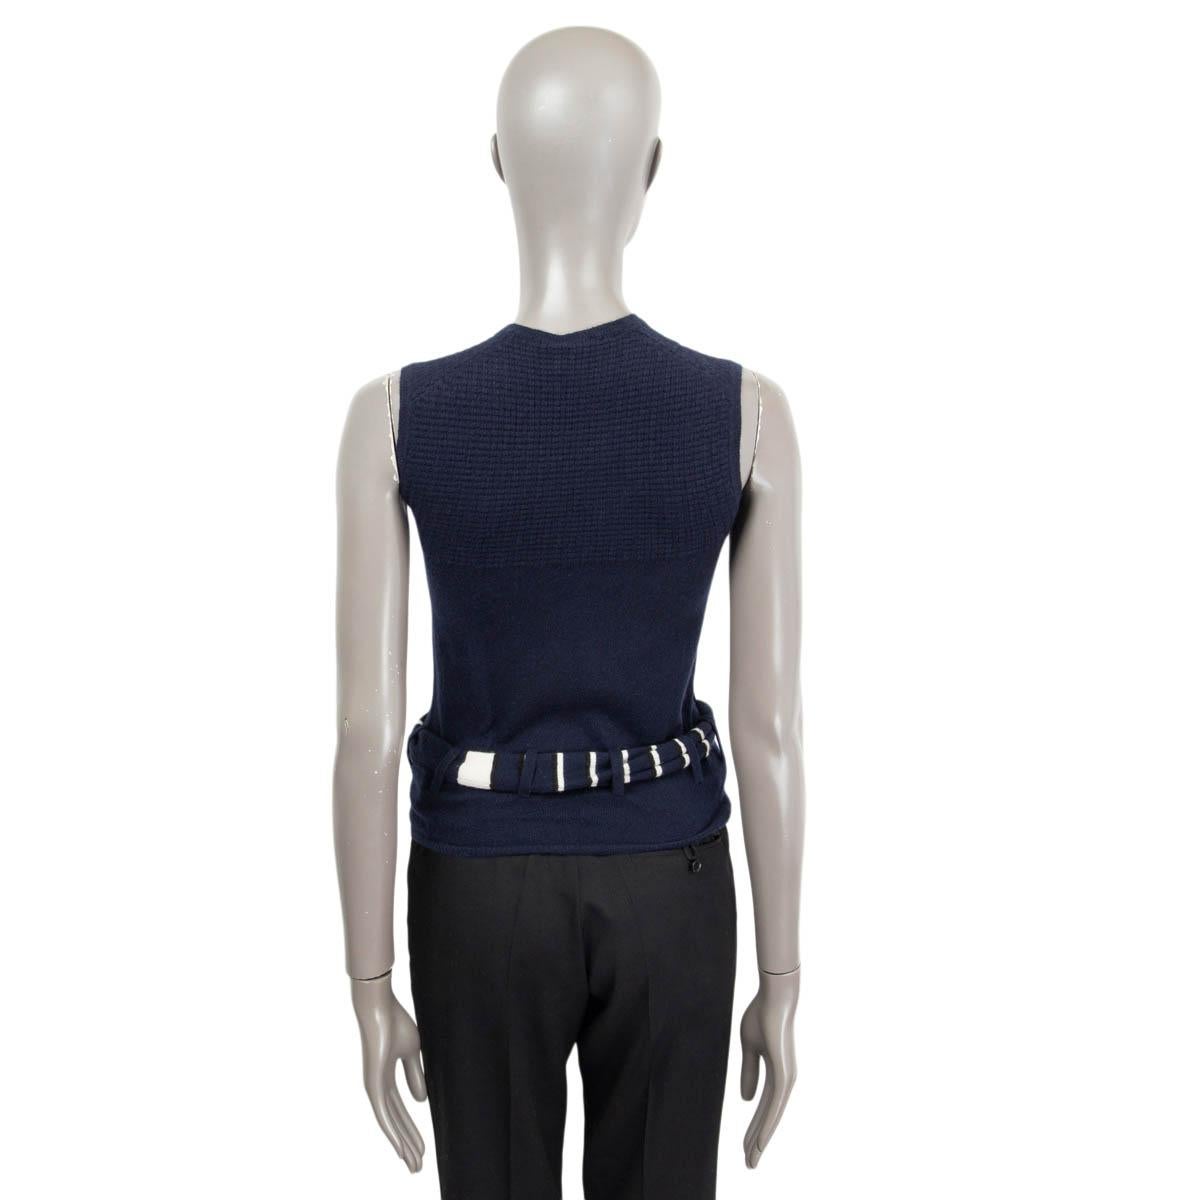 CHANEL navy blue cashmere 2002 SLEEVELESS BELTED KNIT TOP Shirt 38 S For Sale 1